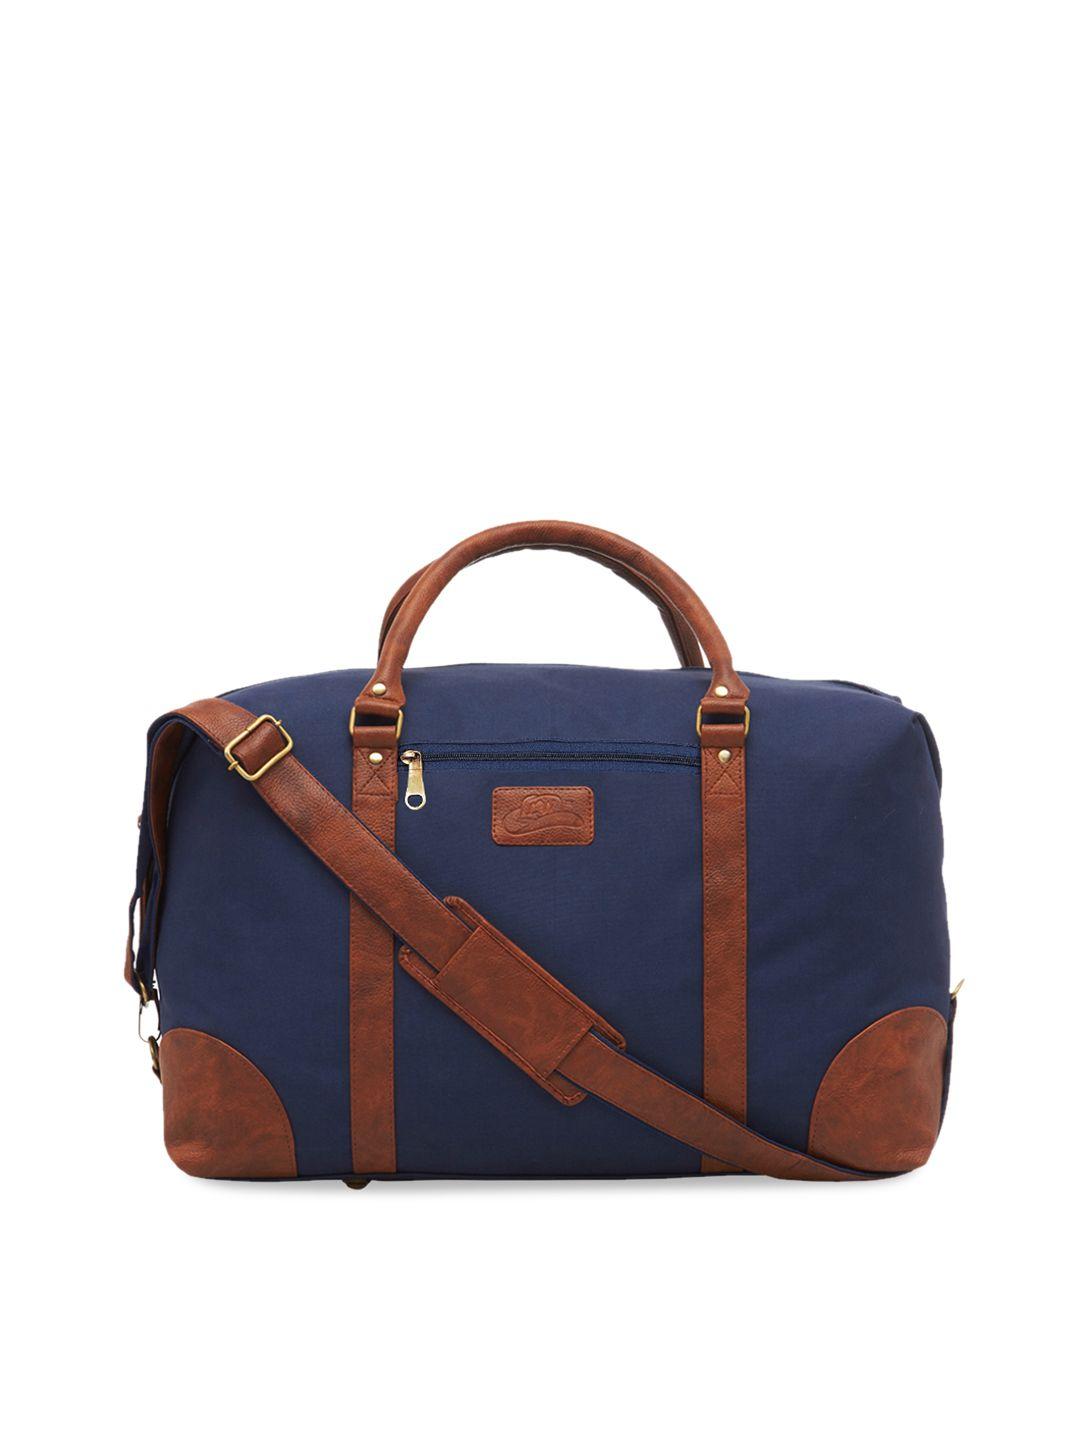 leather world navy blue & brown colourblocked large duffle bag